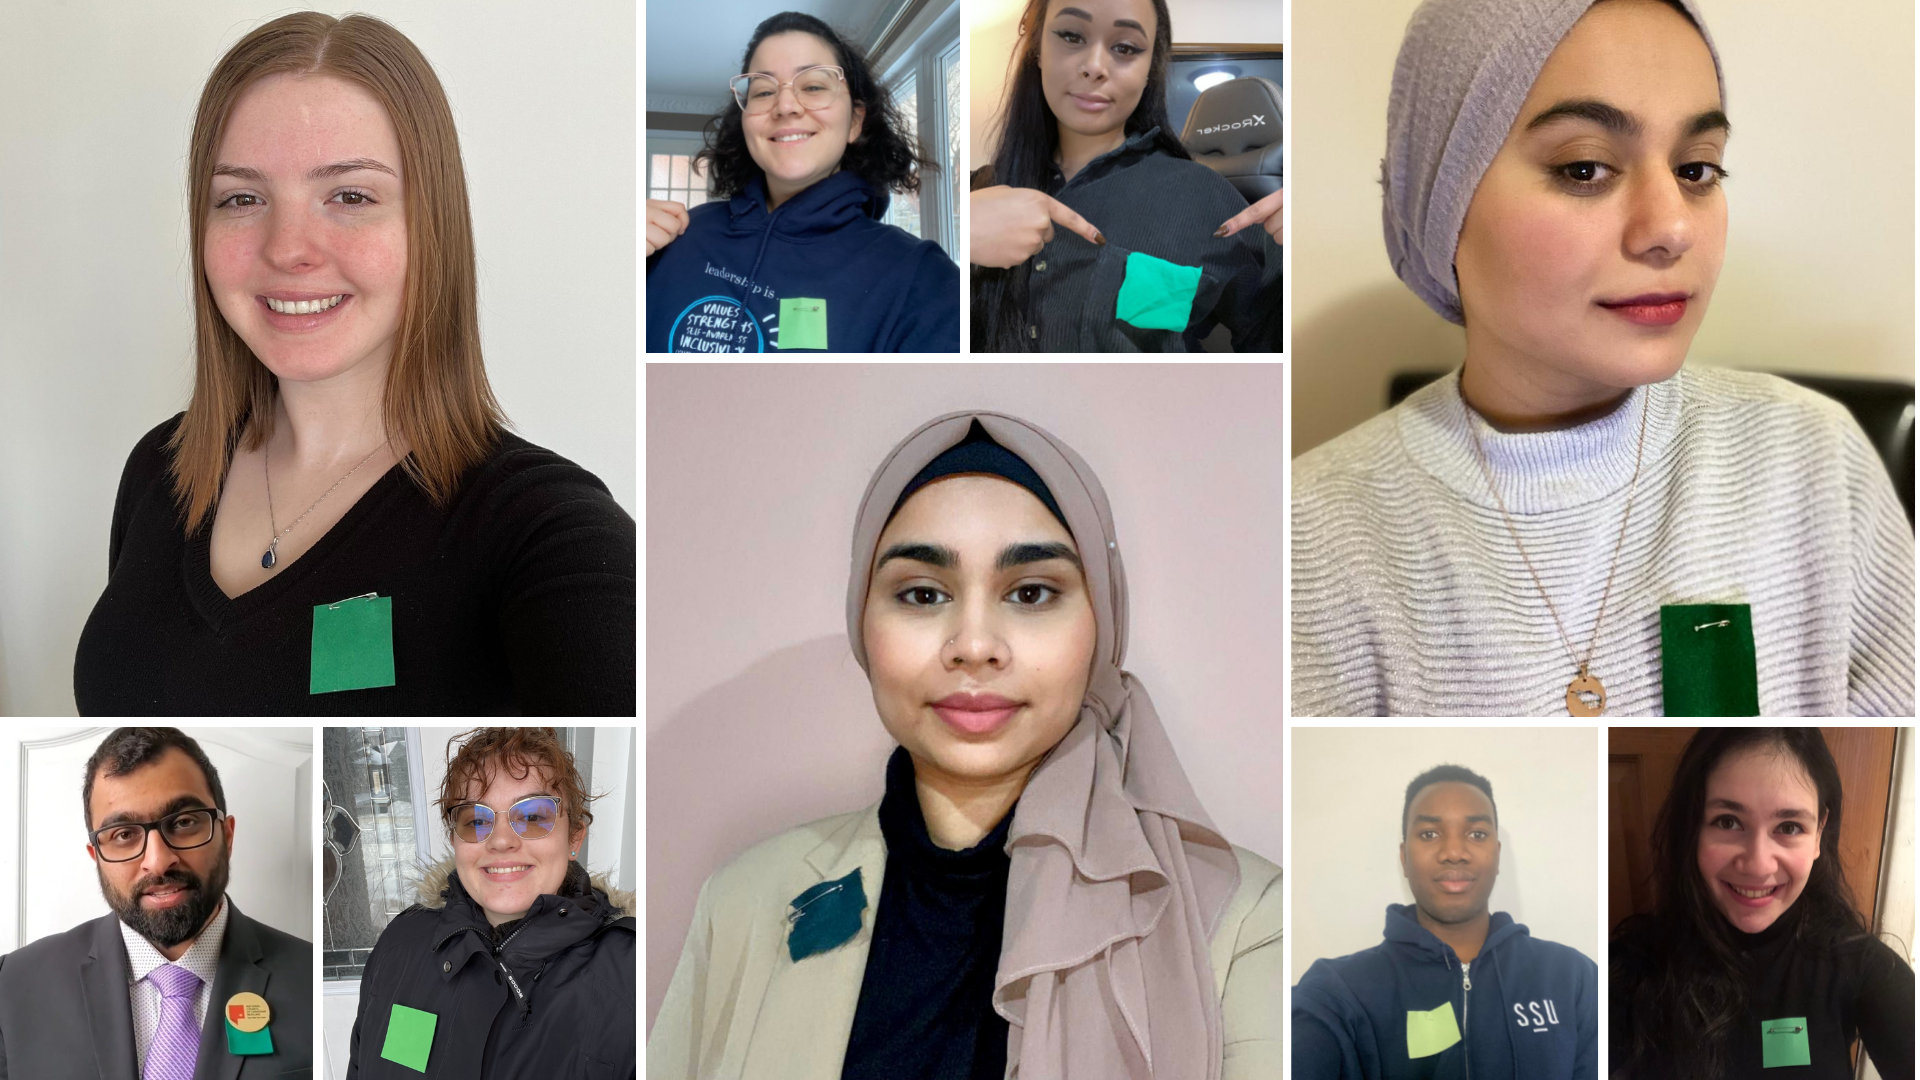   Muslim Students’ Association, in partnership with SSU, Sheridan College and the National Council of Canadian Muslims, hosted a series of events for Islam Awareness Week  to learn, connect and reflect.  